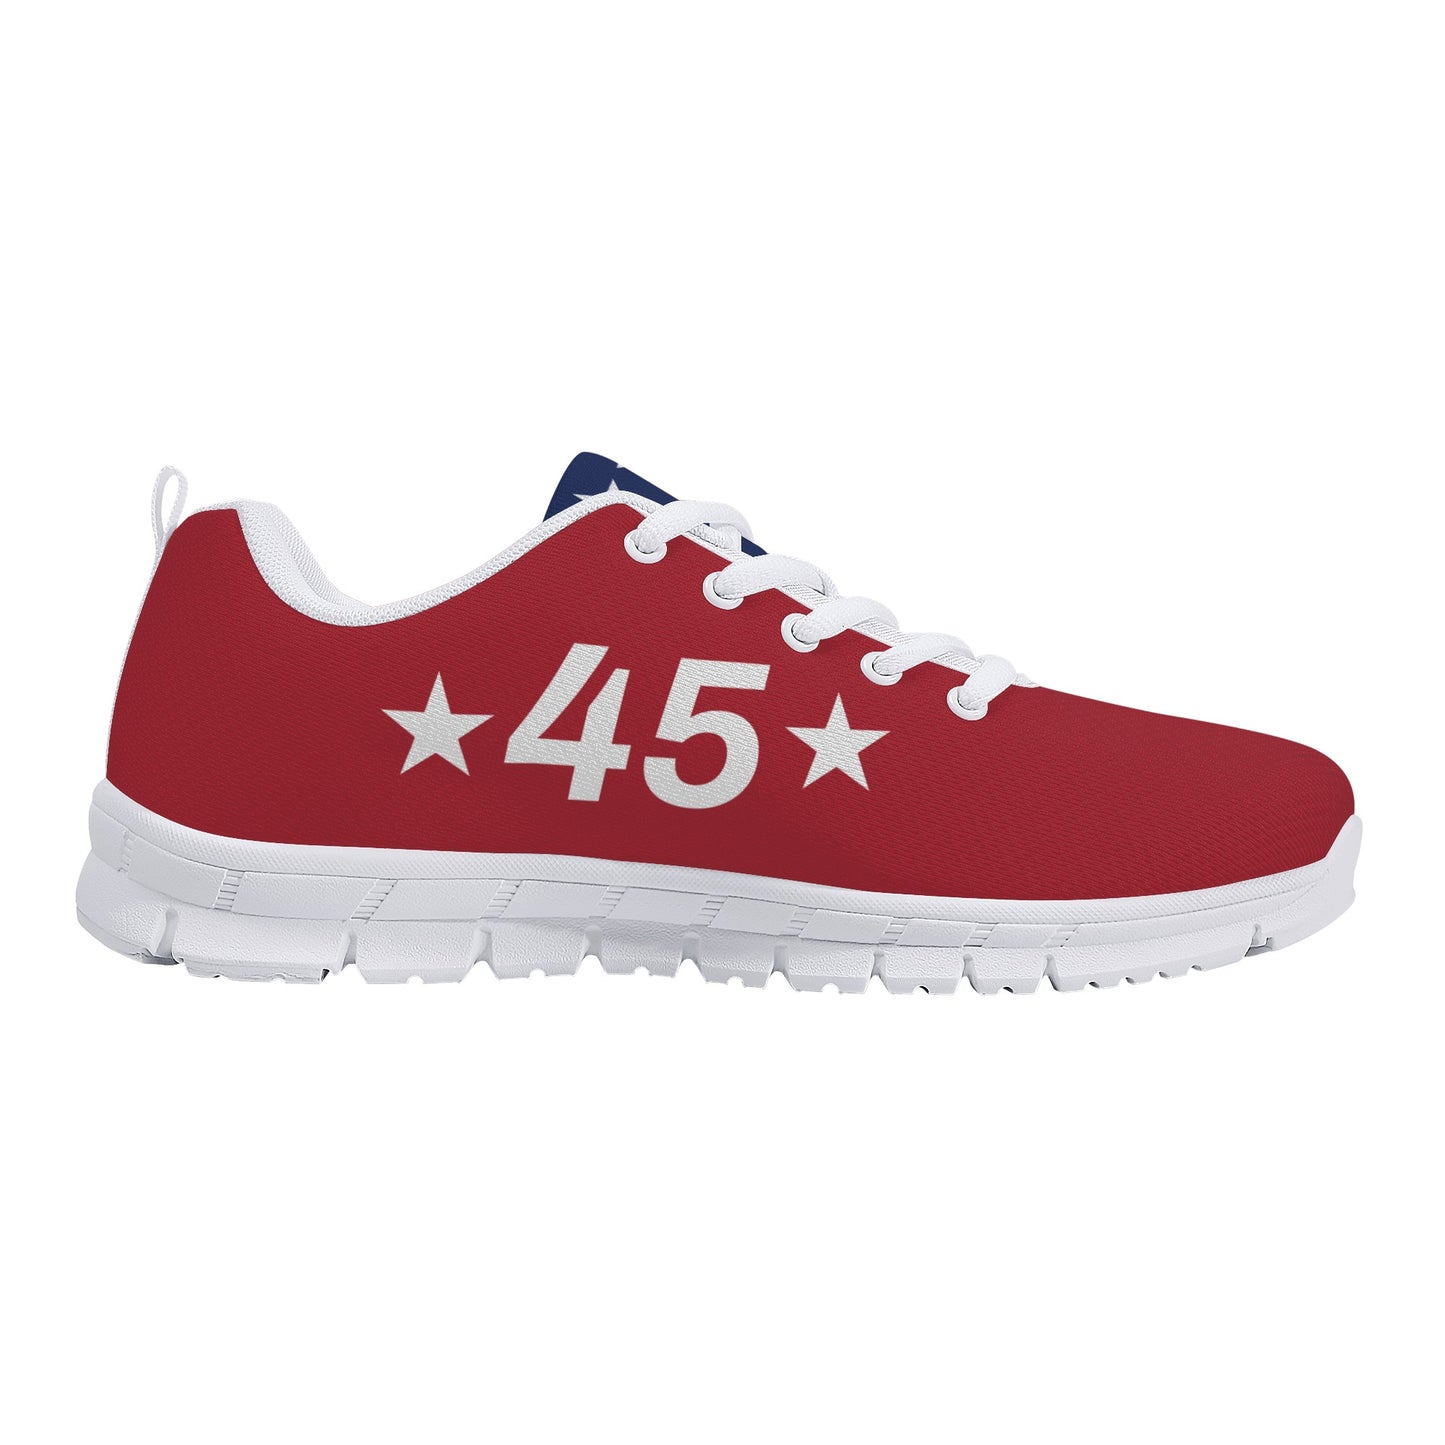 Trump 2024 Red and White Men's Sneaker